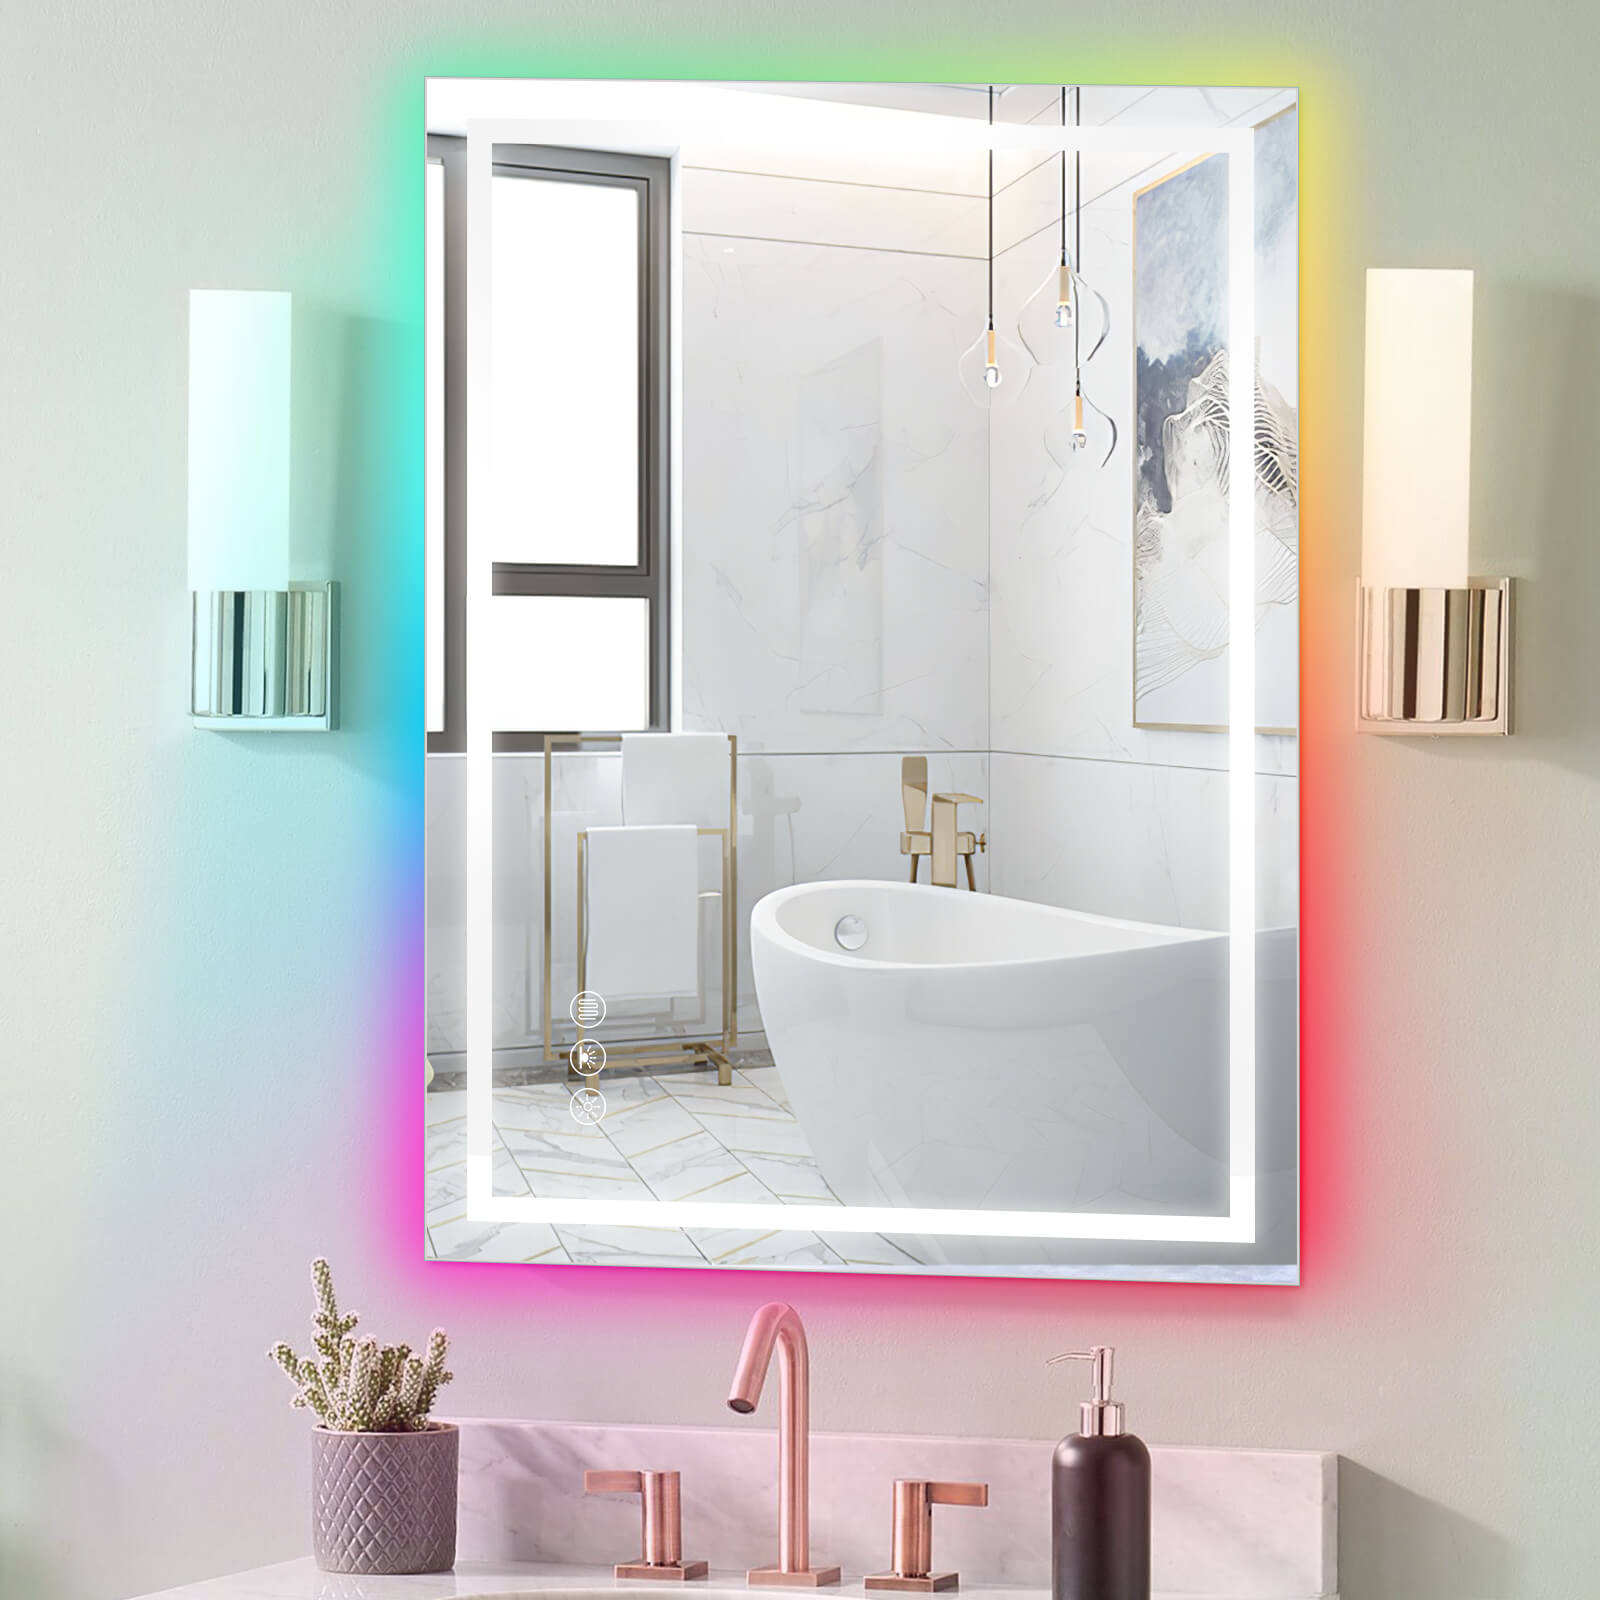 Gladys-Dimmable Lighted RGB LED Bathroom Mirror with Lights